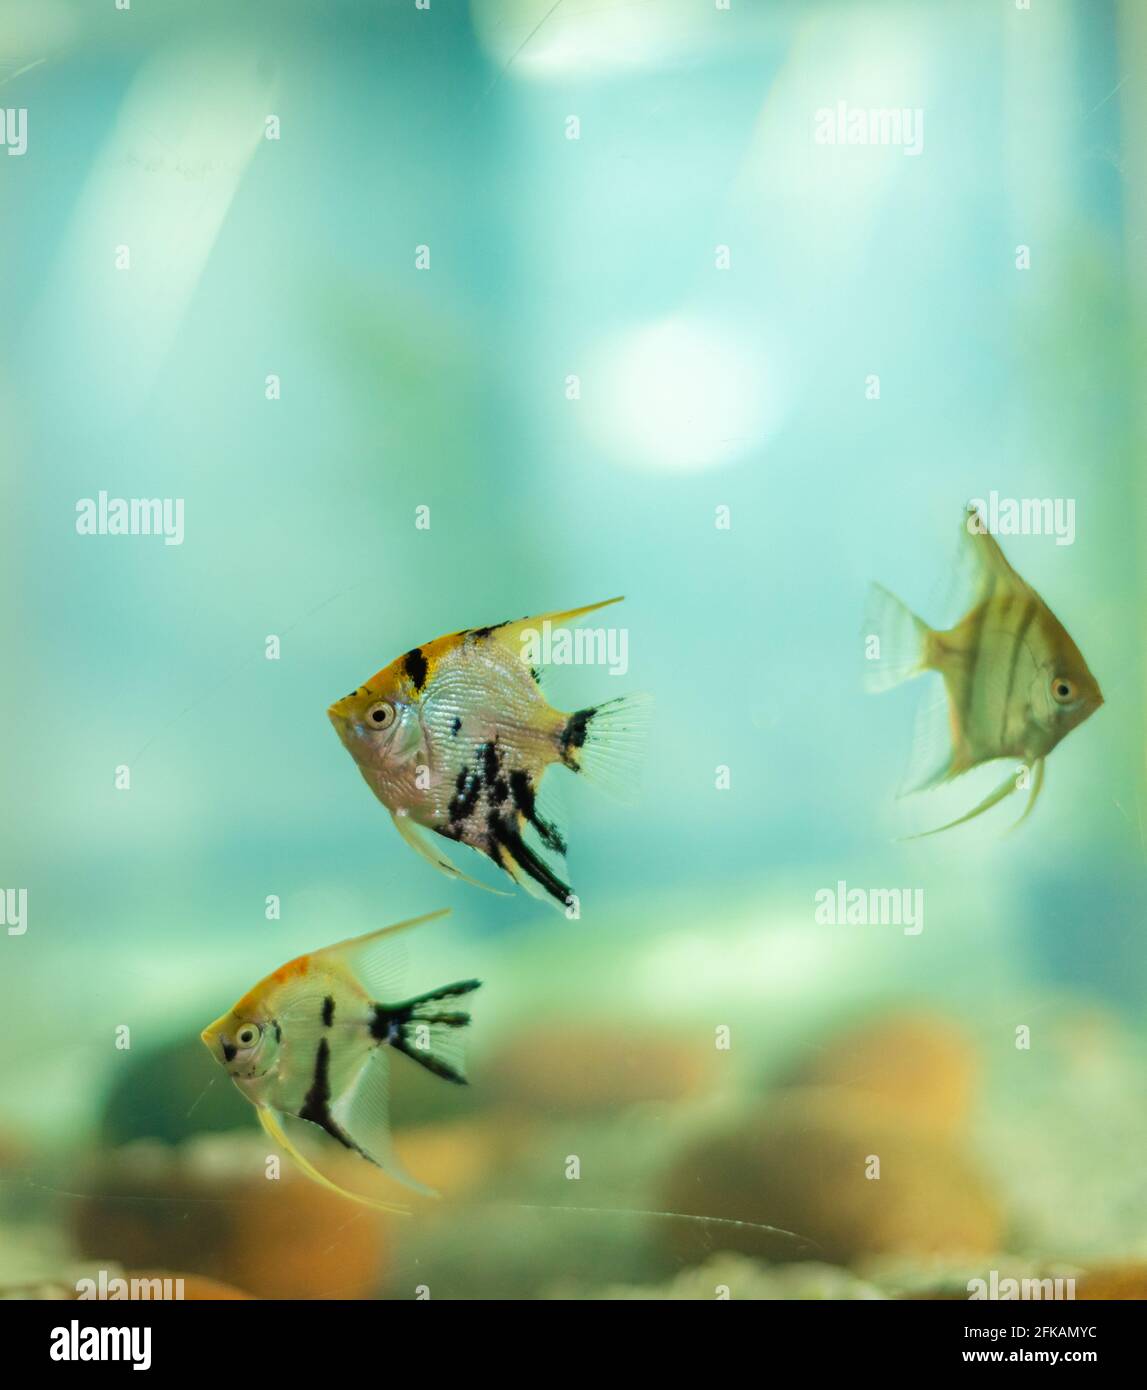 Set of panda angel fishes swimming near the bottom surface of the freshwater fish tank. Stock Photo